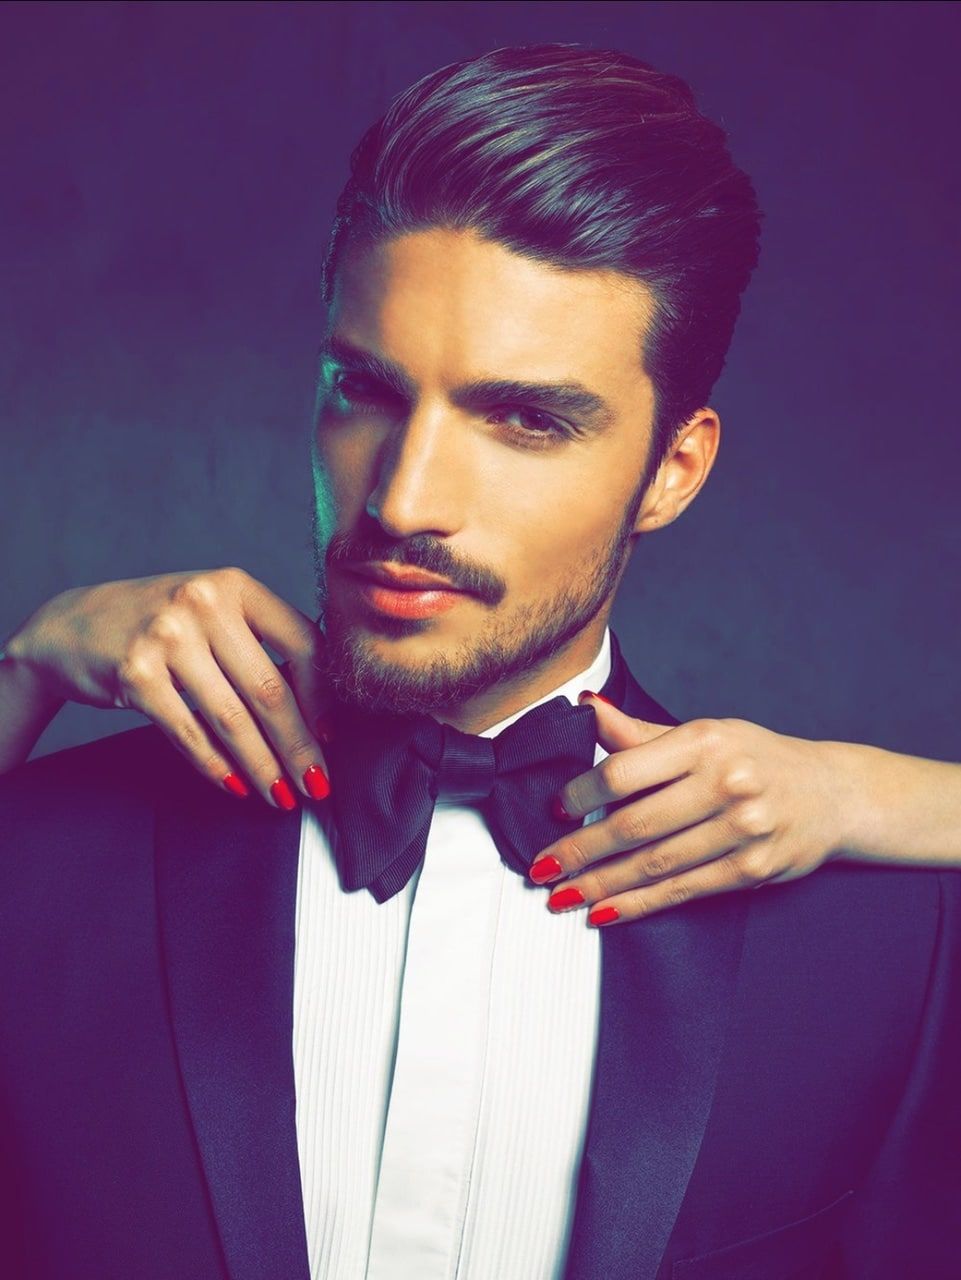 image about Mariano Di Vaio trending